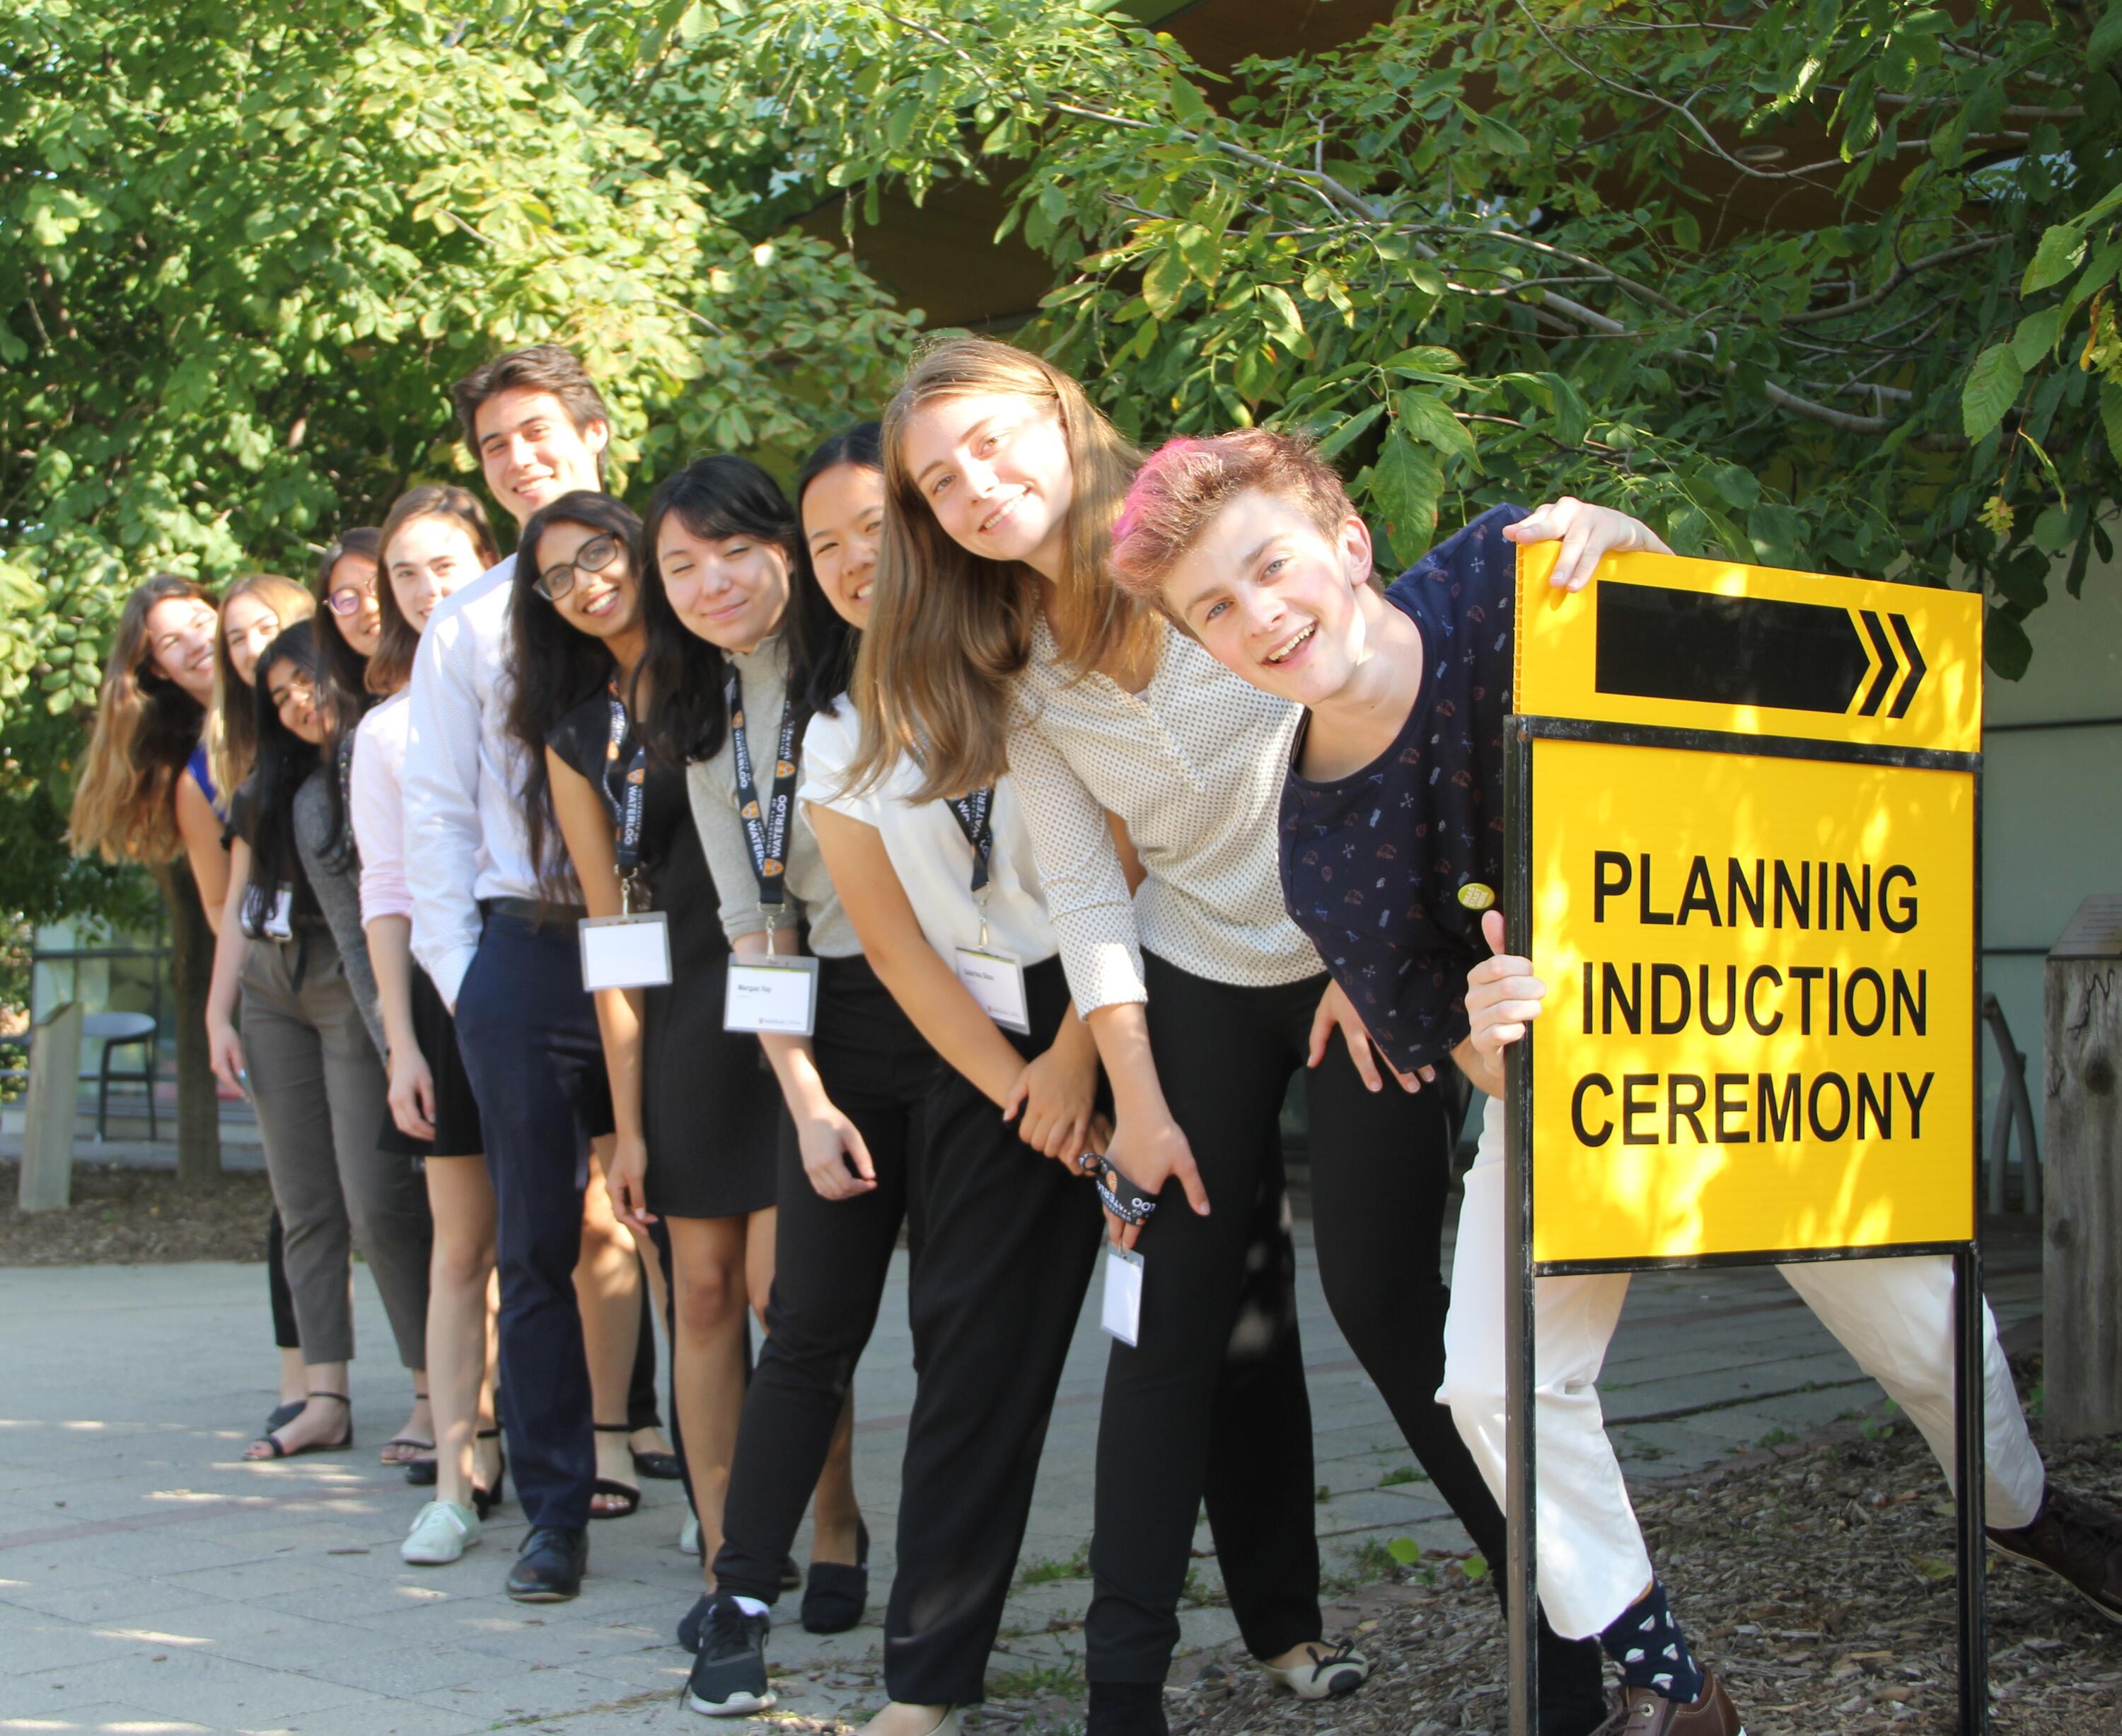 Students in a line with induction ceremony sign